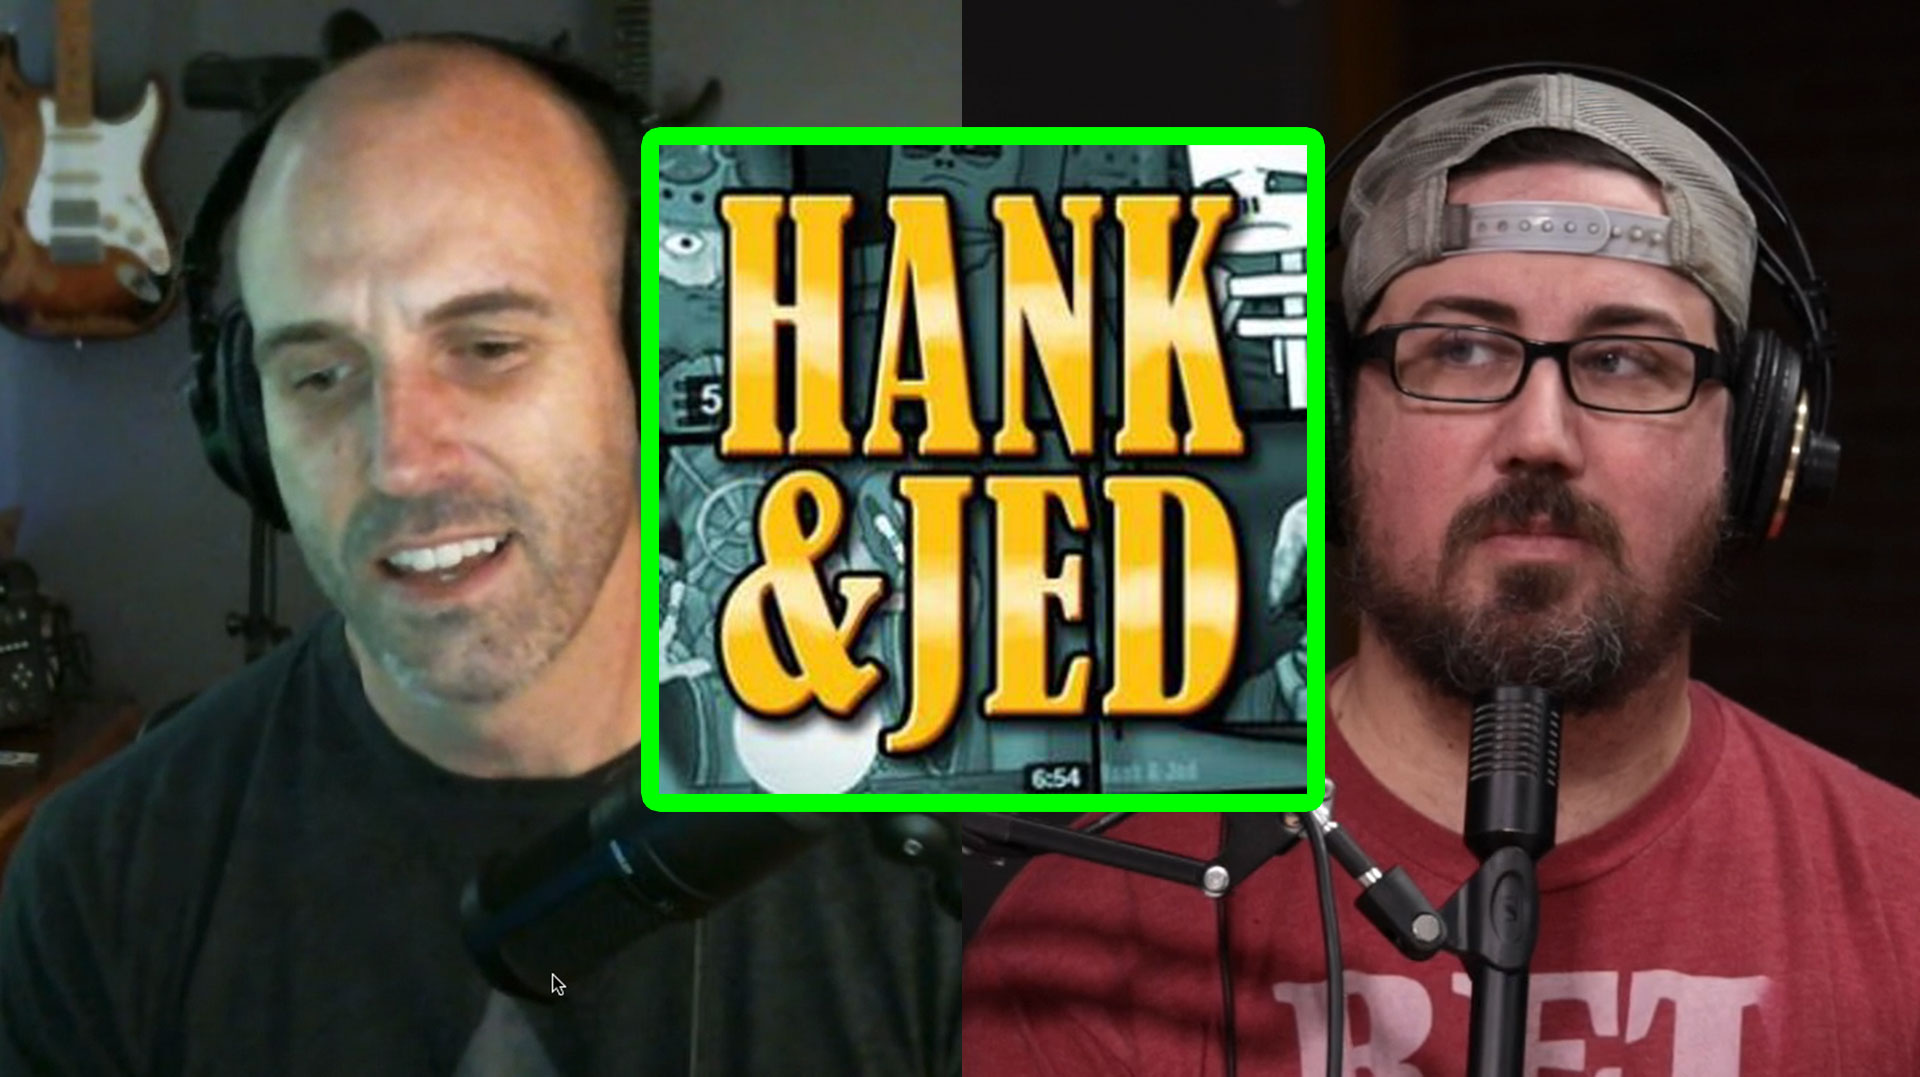 The story behind the animation channel Hank and Jed getting Hacked ...